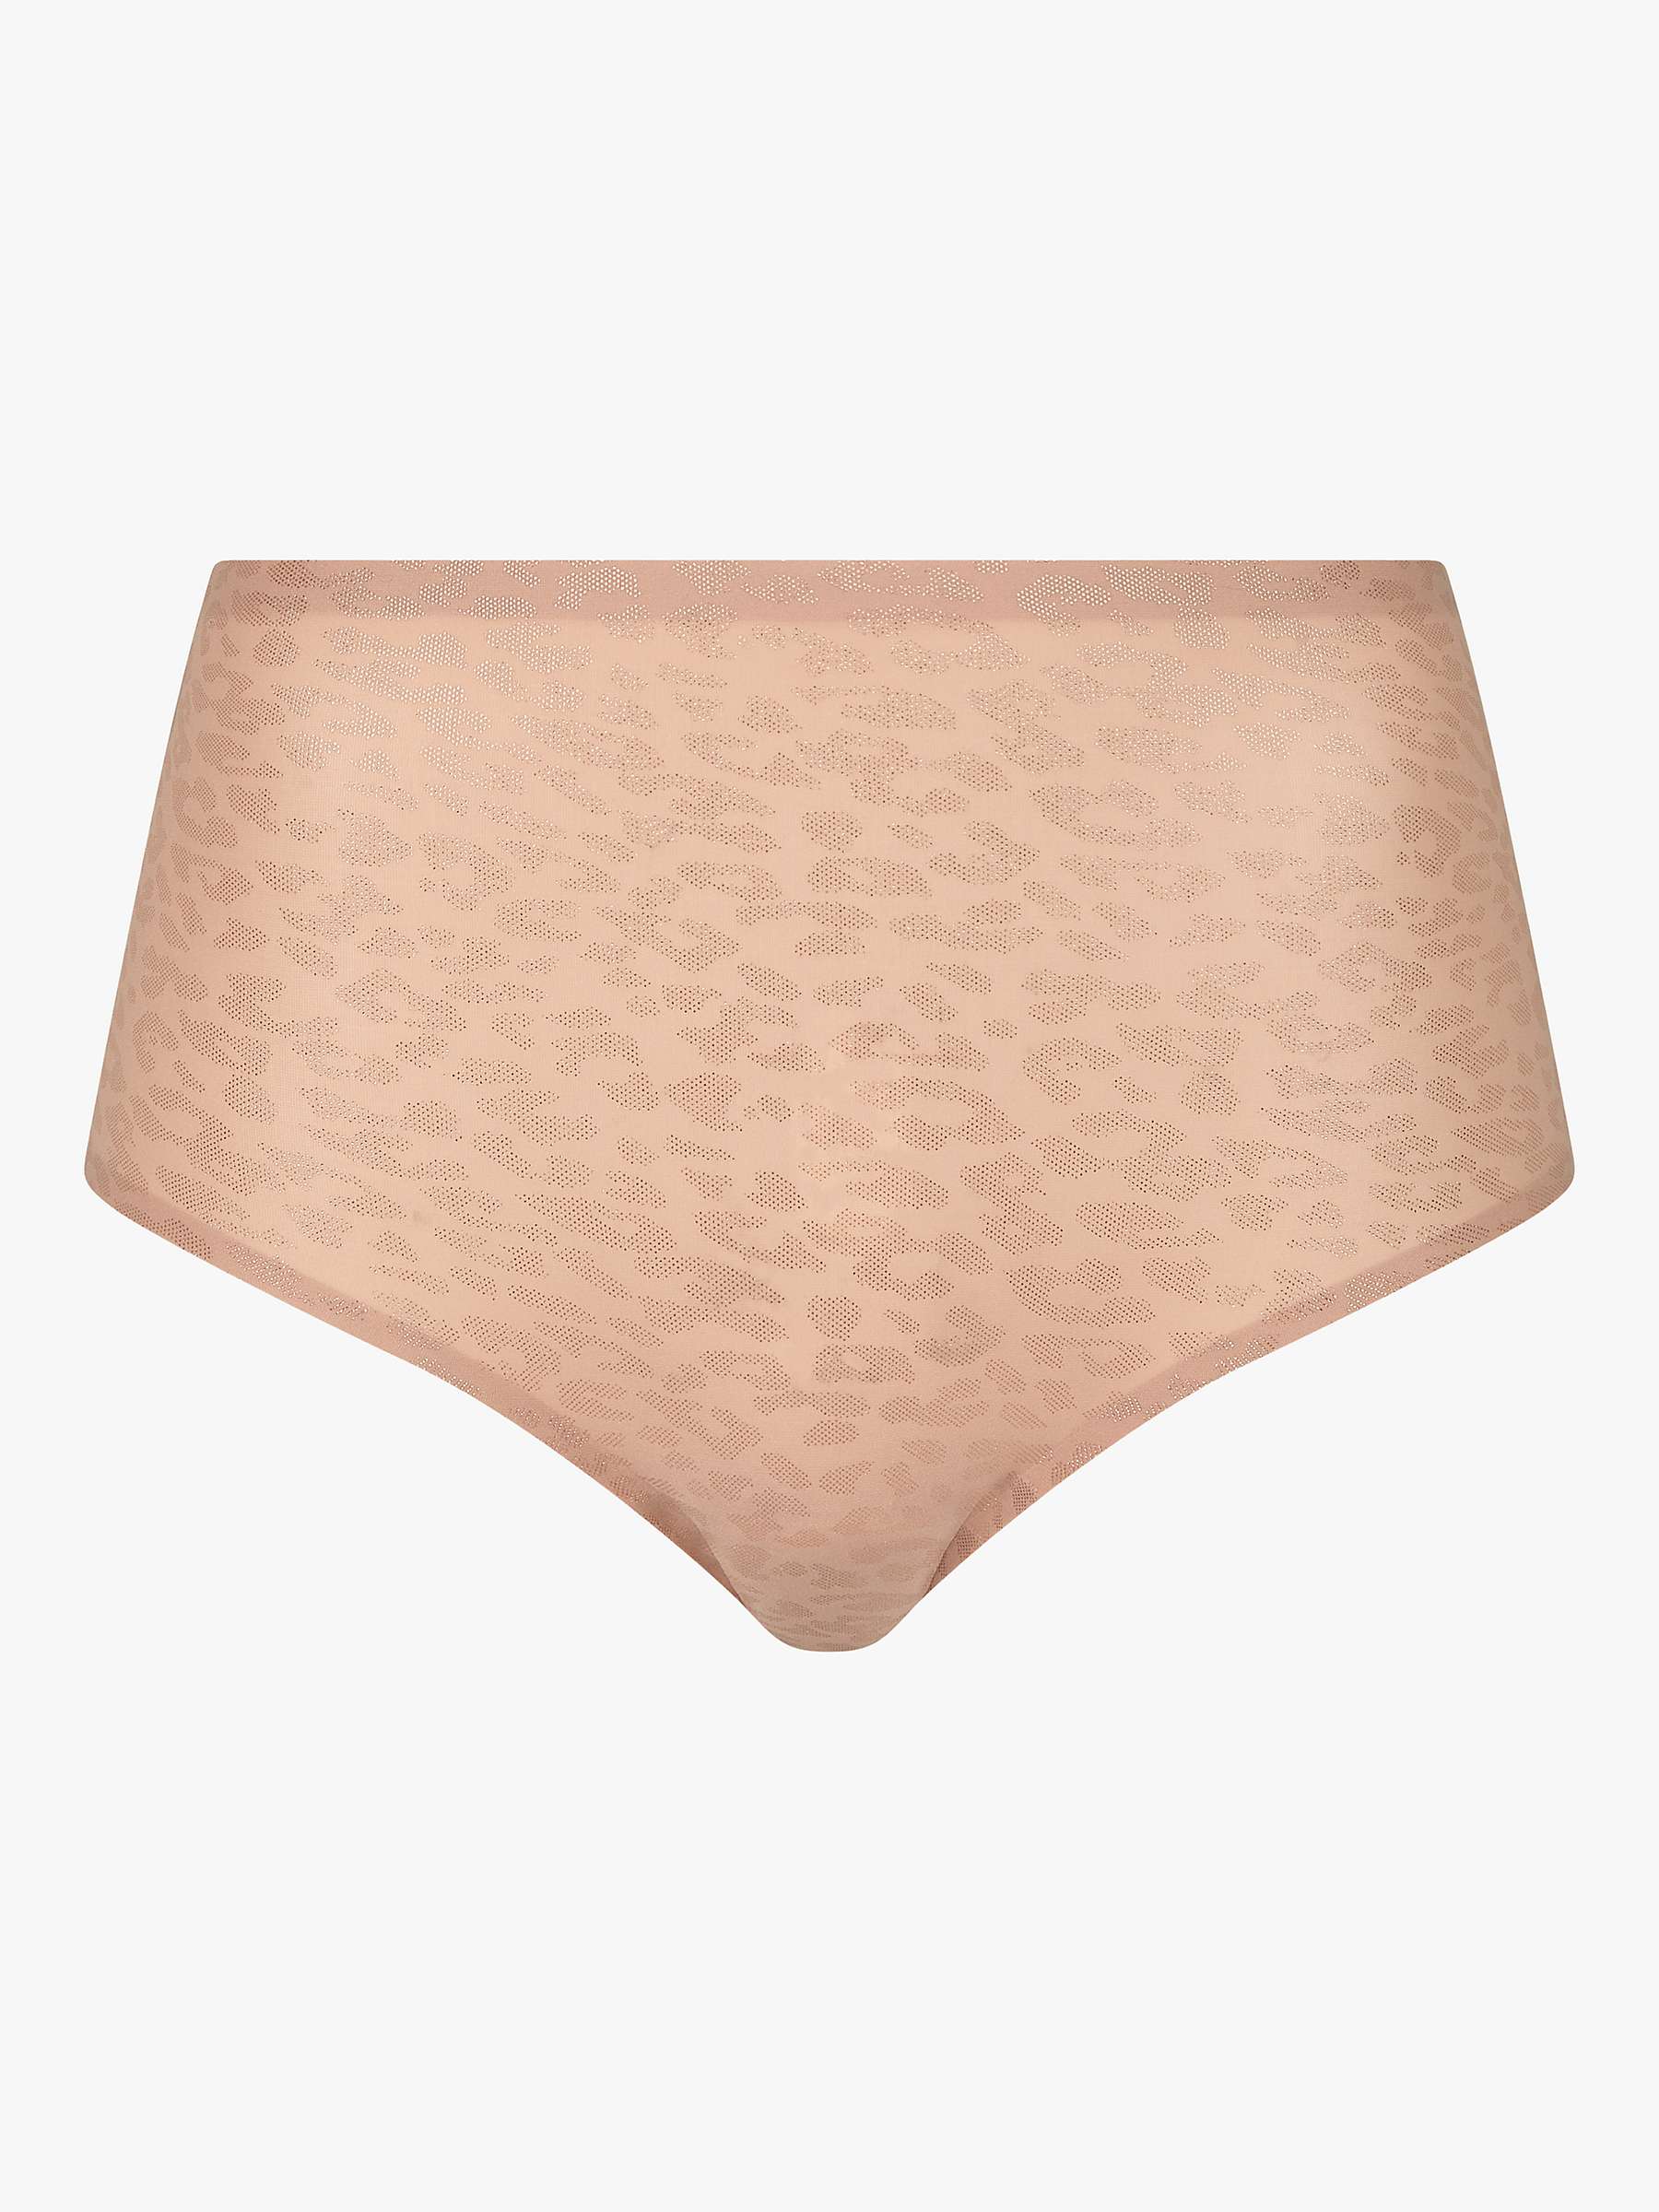 Buy Chantelle Leopard Print Soft Stretch High Waisted Knickers, Shimmer Online at johnlewis.com